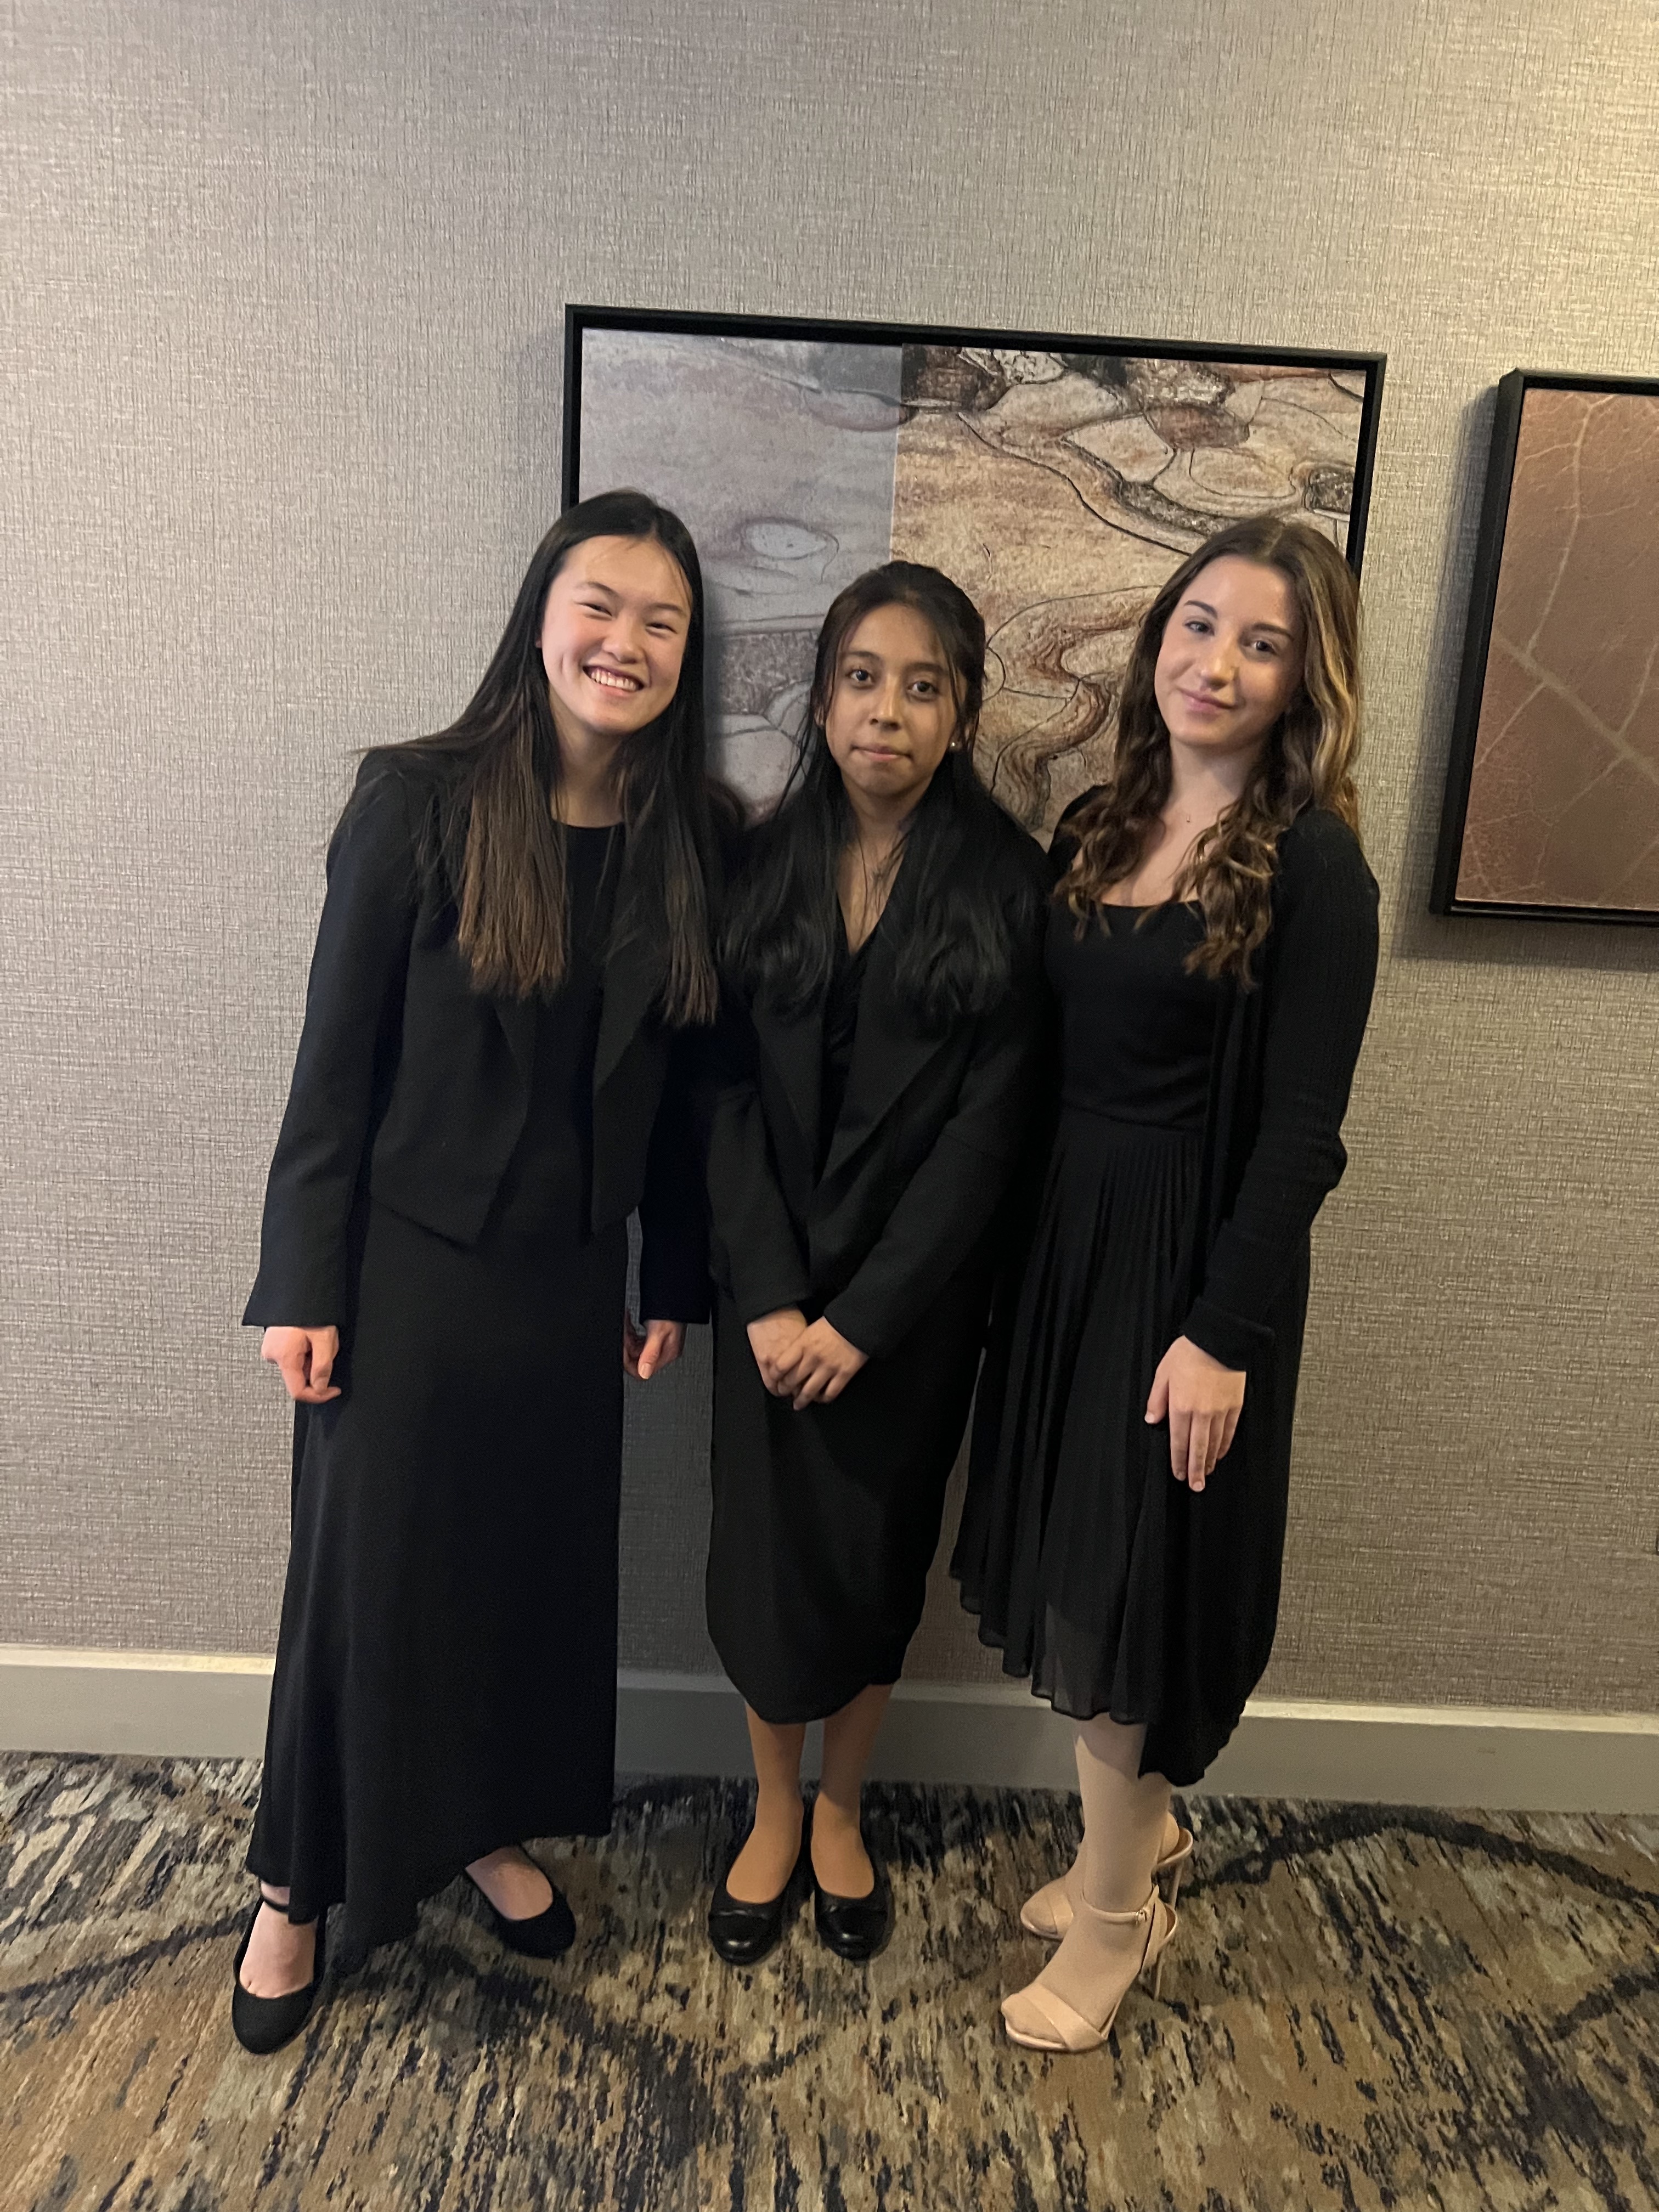 Westhampton Beach High School band students Angelina LeMaire, Yulianna Mendez-Yaxon and Lilah Caputo recently performed with the New York State Band Directors Association High School Honor Band. COURTESY WESTHAMPTON BEACH SCHOOL DISTRICT